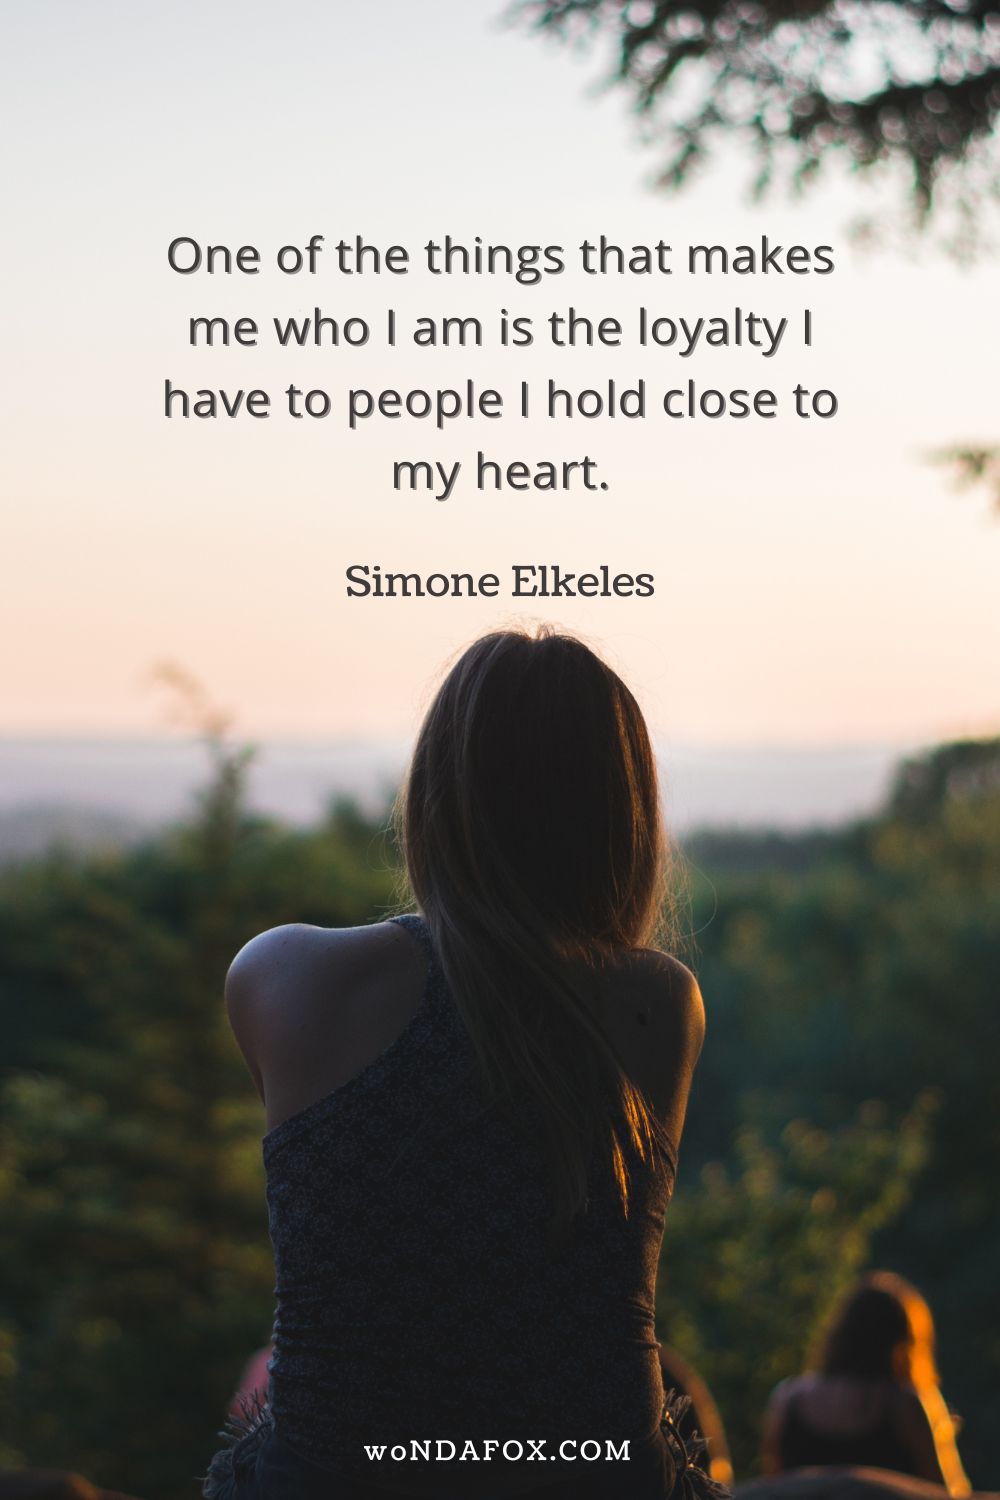 “One of the things that makes me who I am is the loyalty I have to people I hold close to my heart.” 